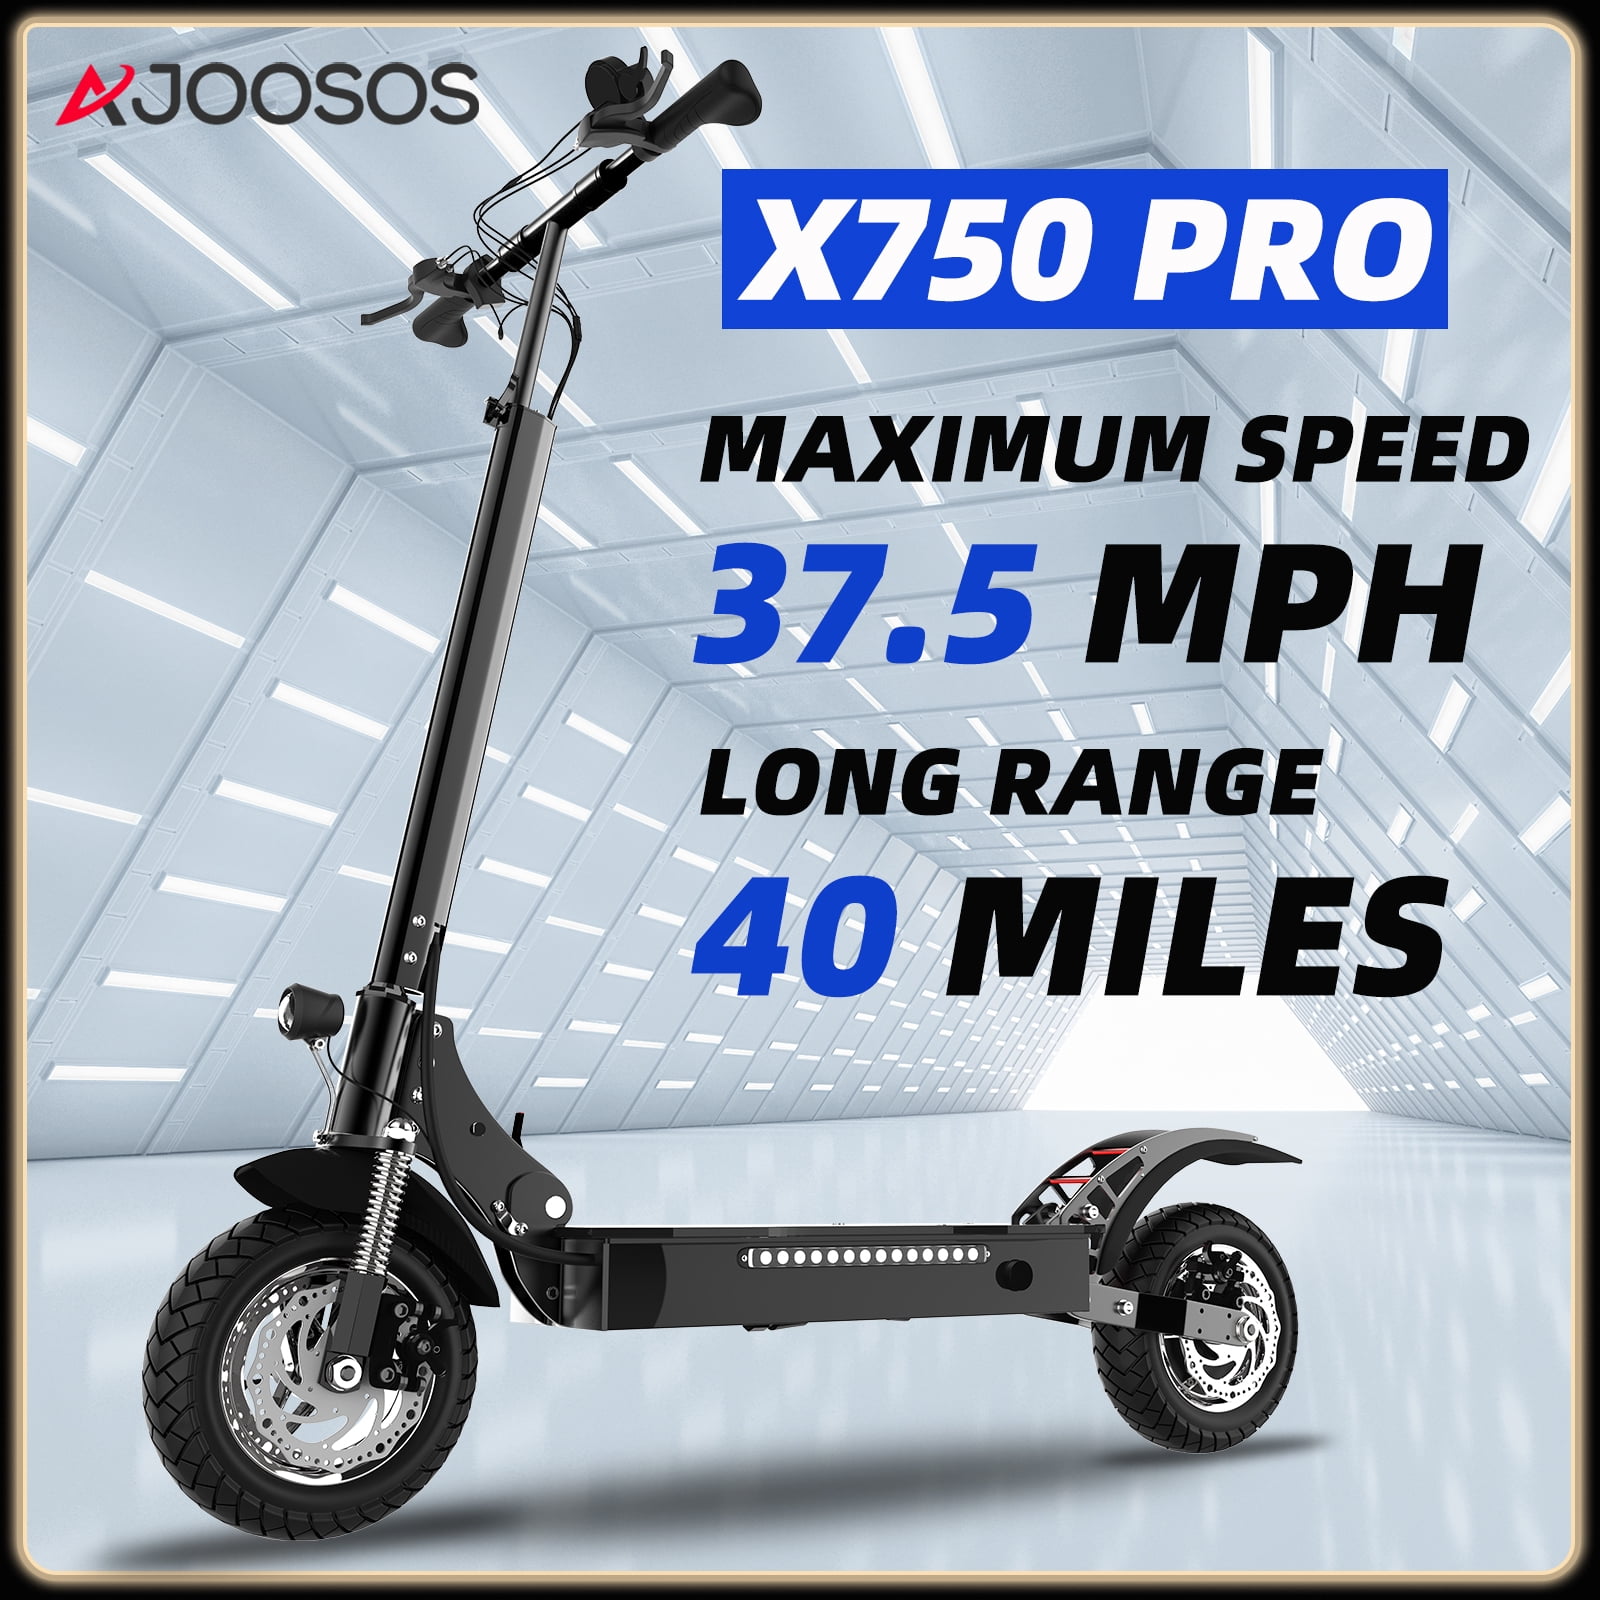 AJOOSOS X750 Pro Electric Scooter for Adults - 37.5 mph Top Speed, 40 Miles Long Range, 10 Inch Pneumatic Tire, 300 Lbs Max Load, Foldable E-Scooter